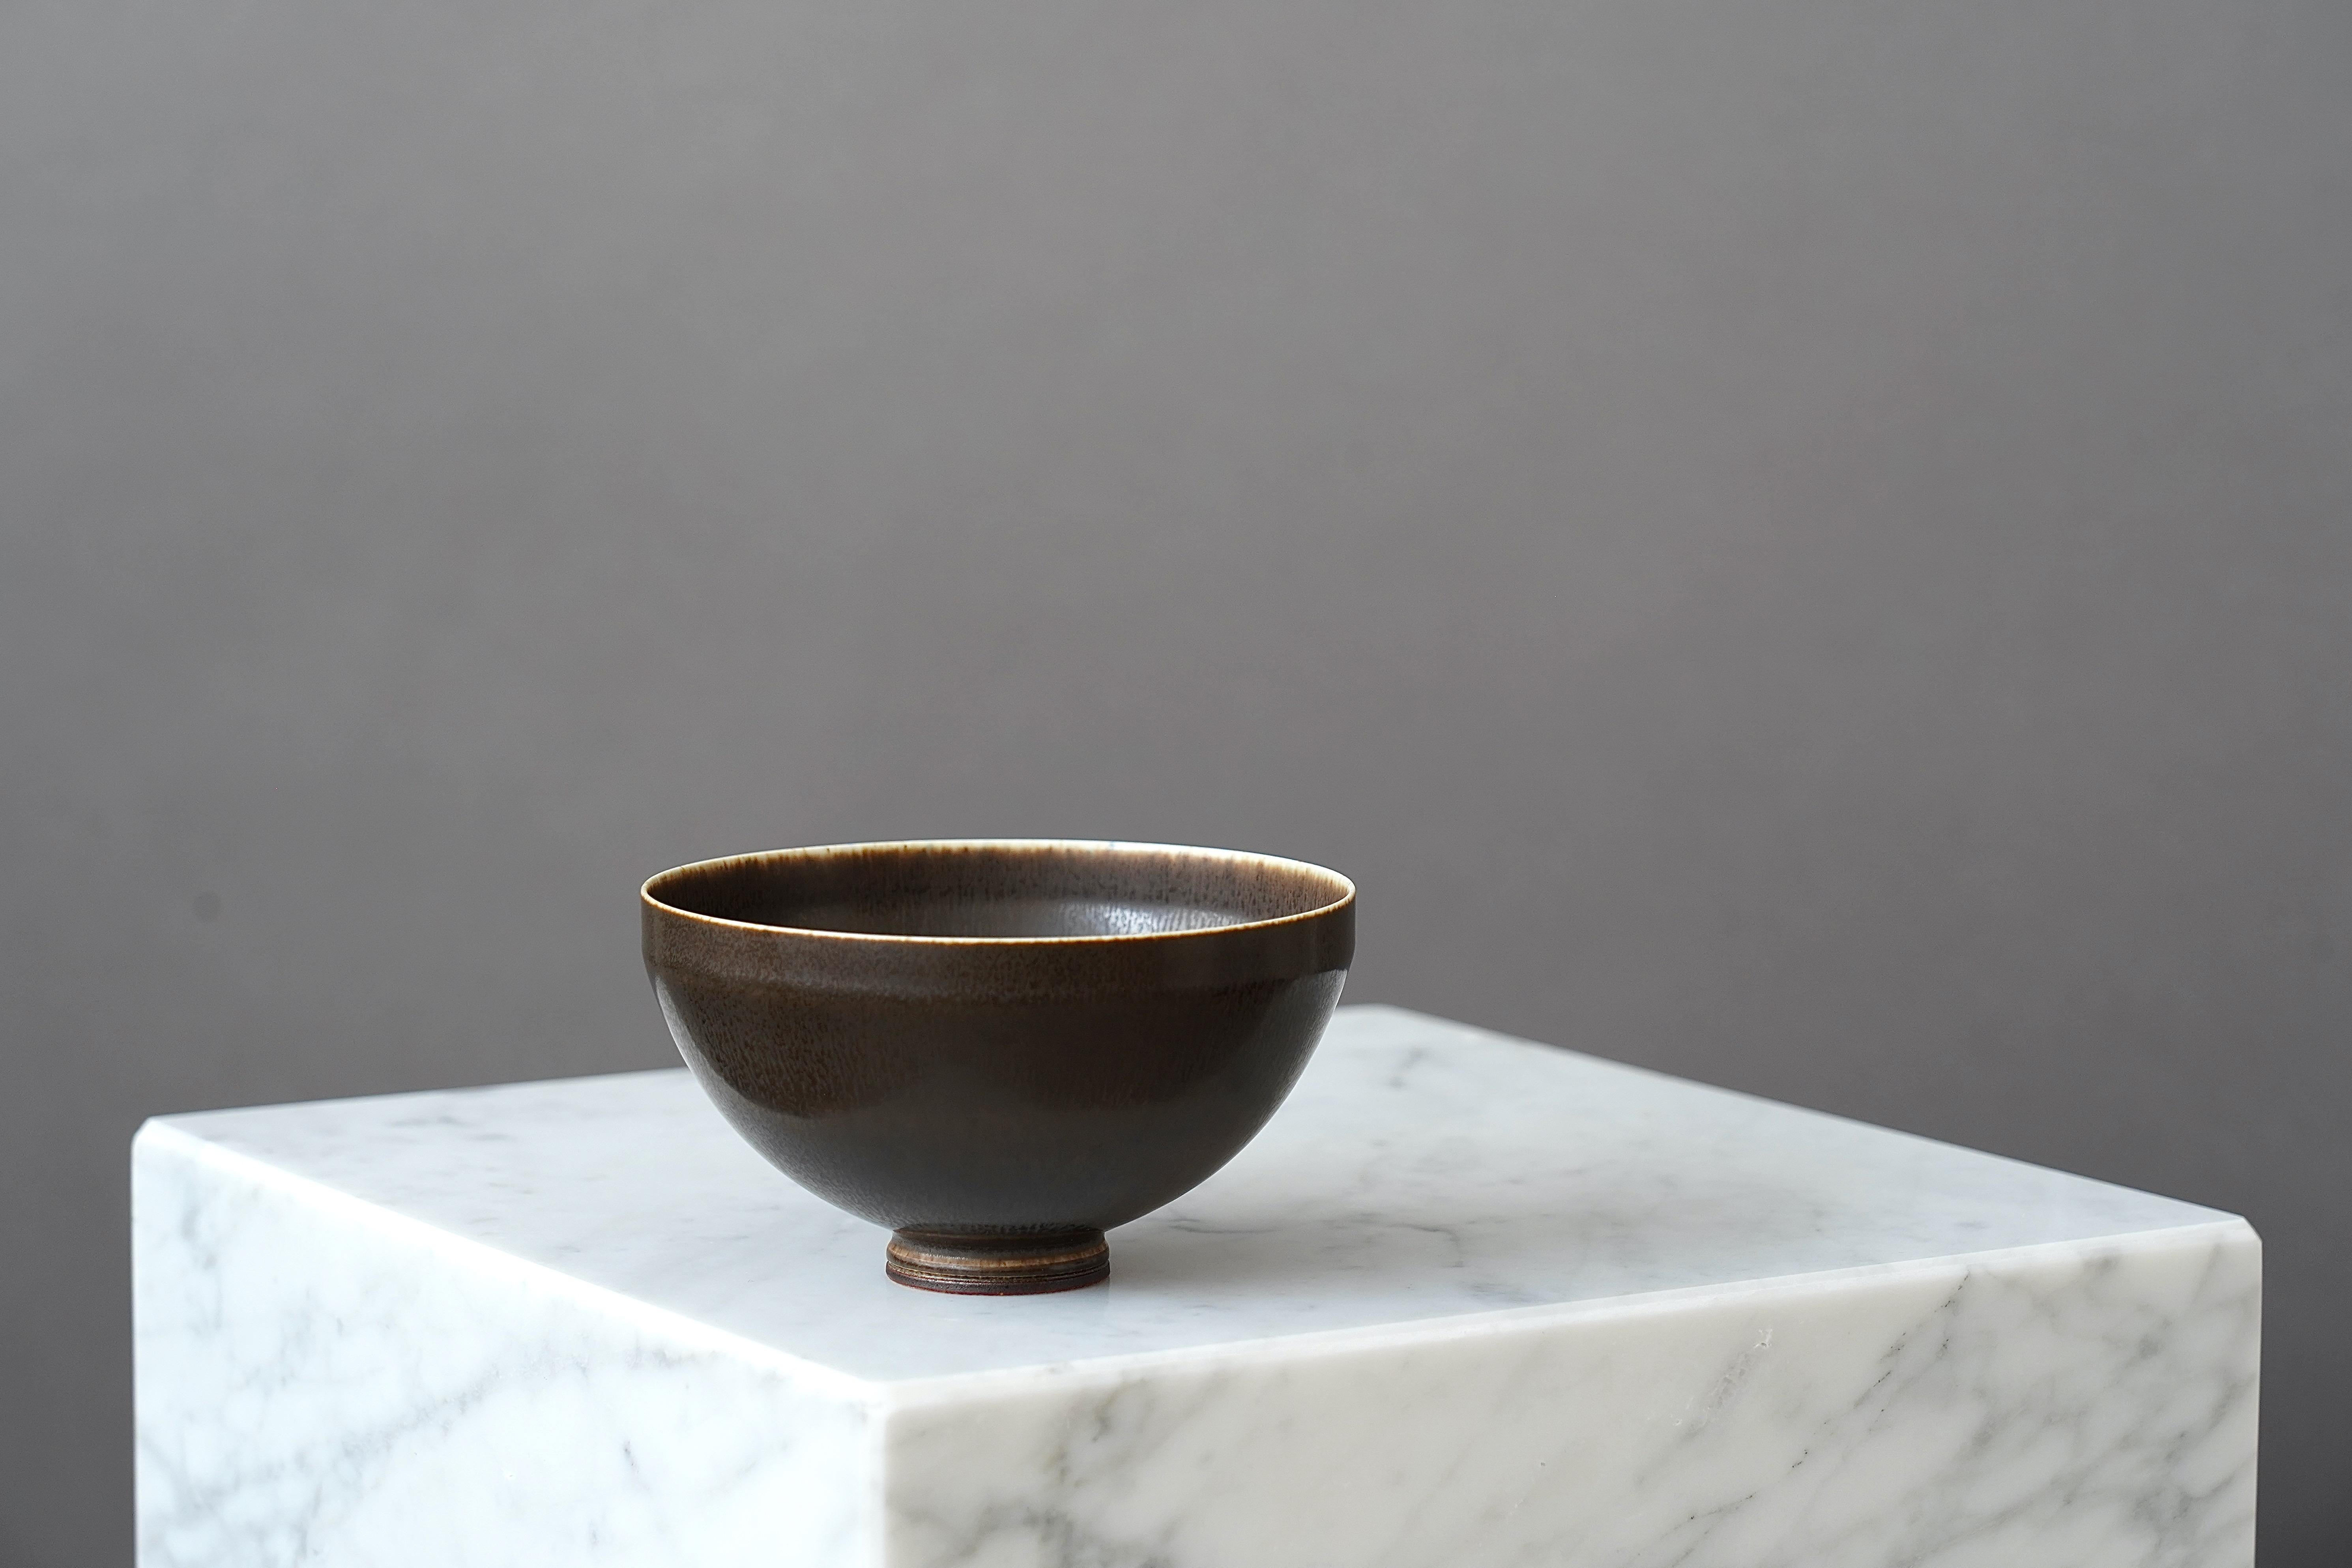 A beautiful stoneware bowl with amazing hare’s fur glaze.
Made by master thrower Berndt Friberg, in the artist's studio at Gustavsberg, Sweden.

Excellent condition. Incised signature 